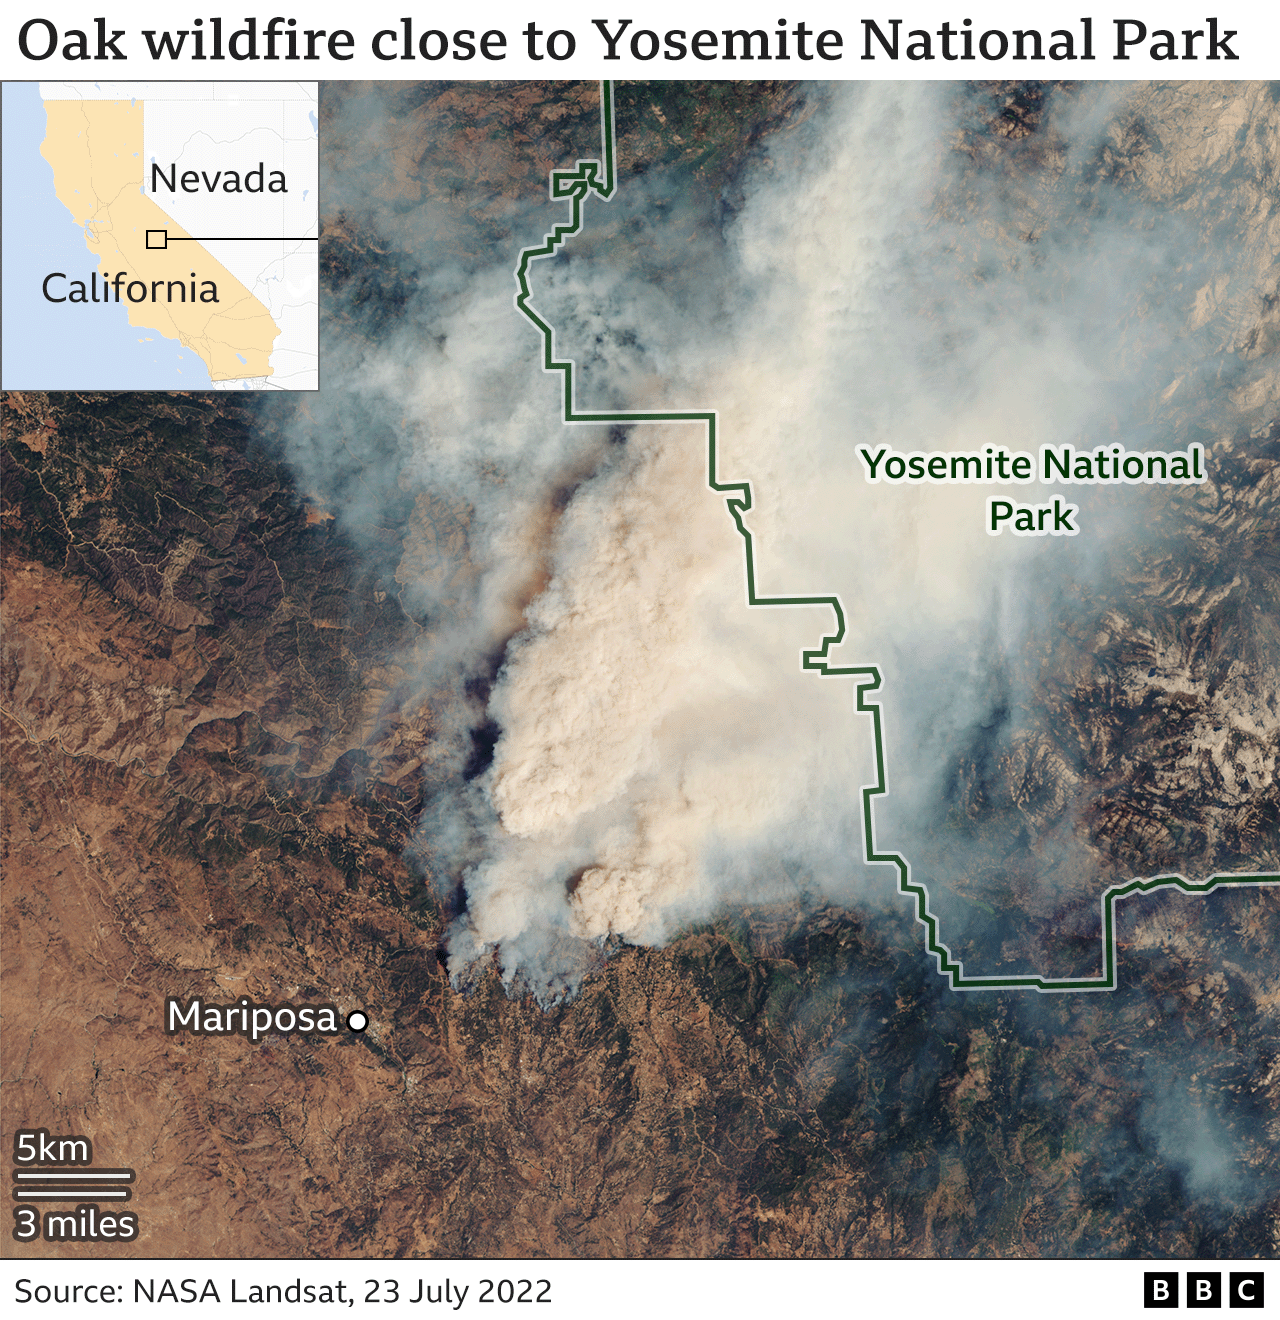 Location of oak wildfire close to Yosemite National Park